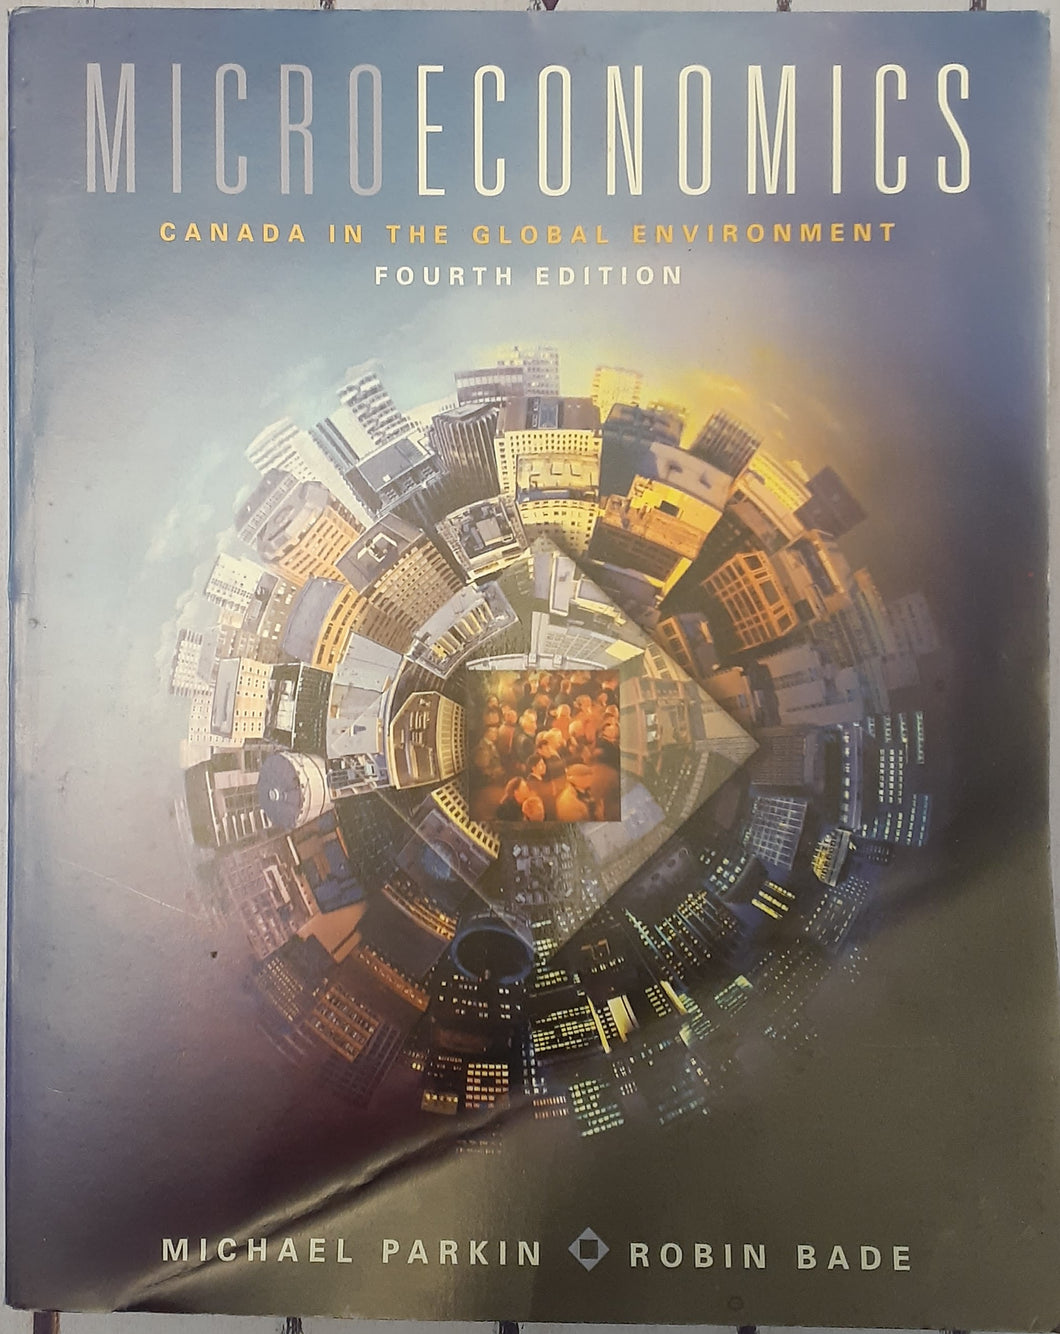 Microeconomics - Canada in the Global Environment